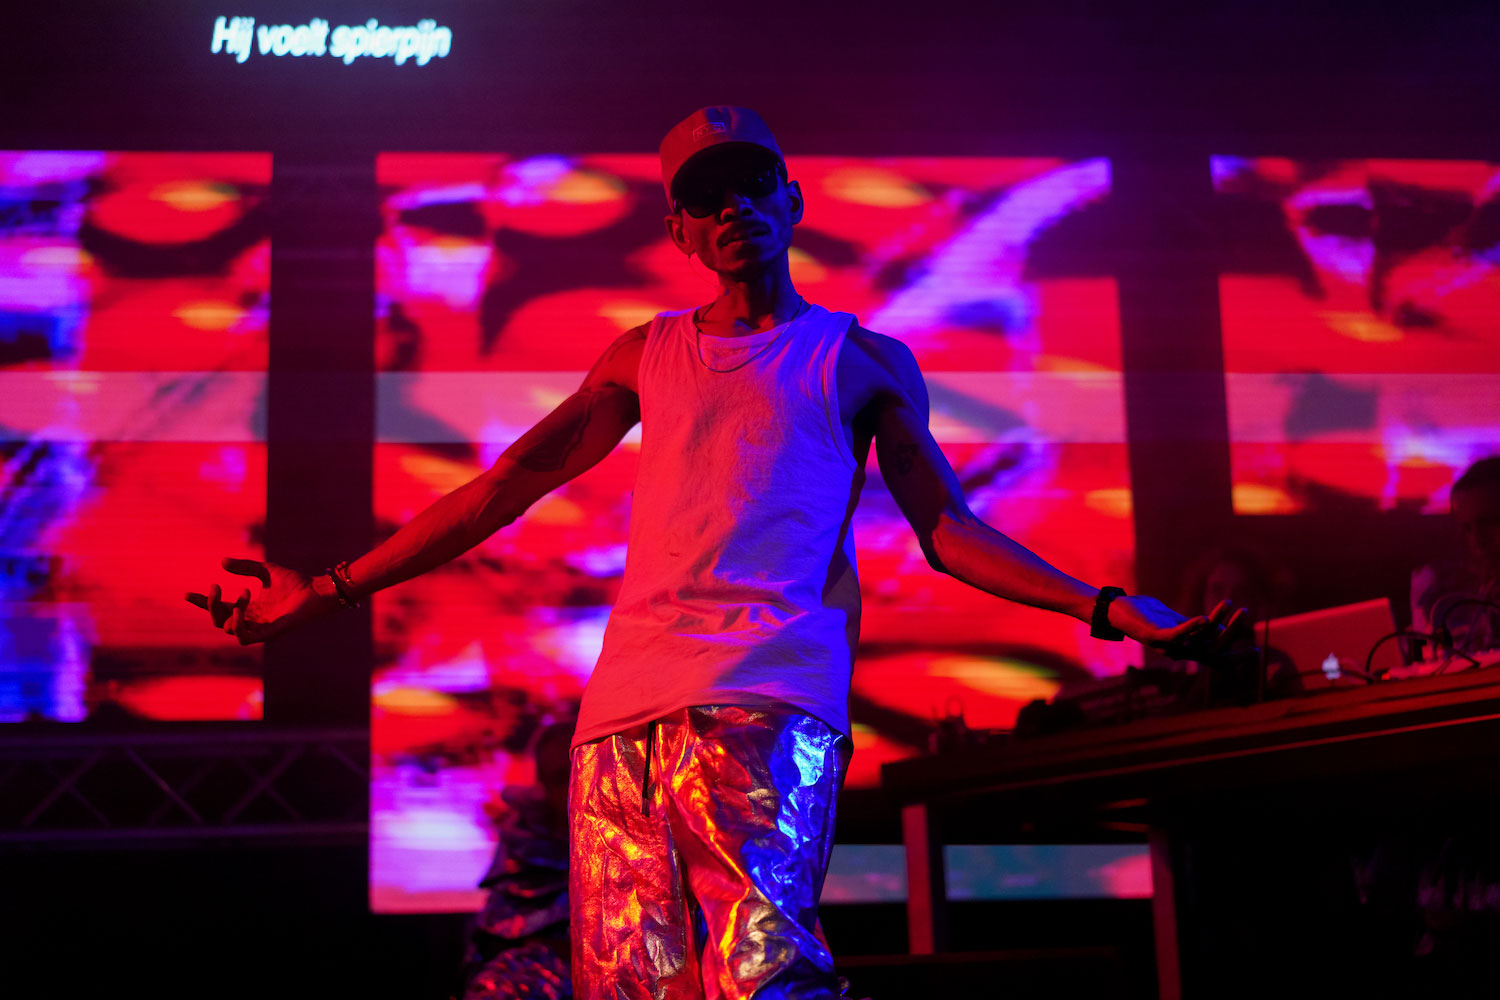 A person dances in a club setting with projections behind and red-purple light